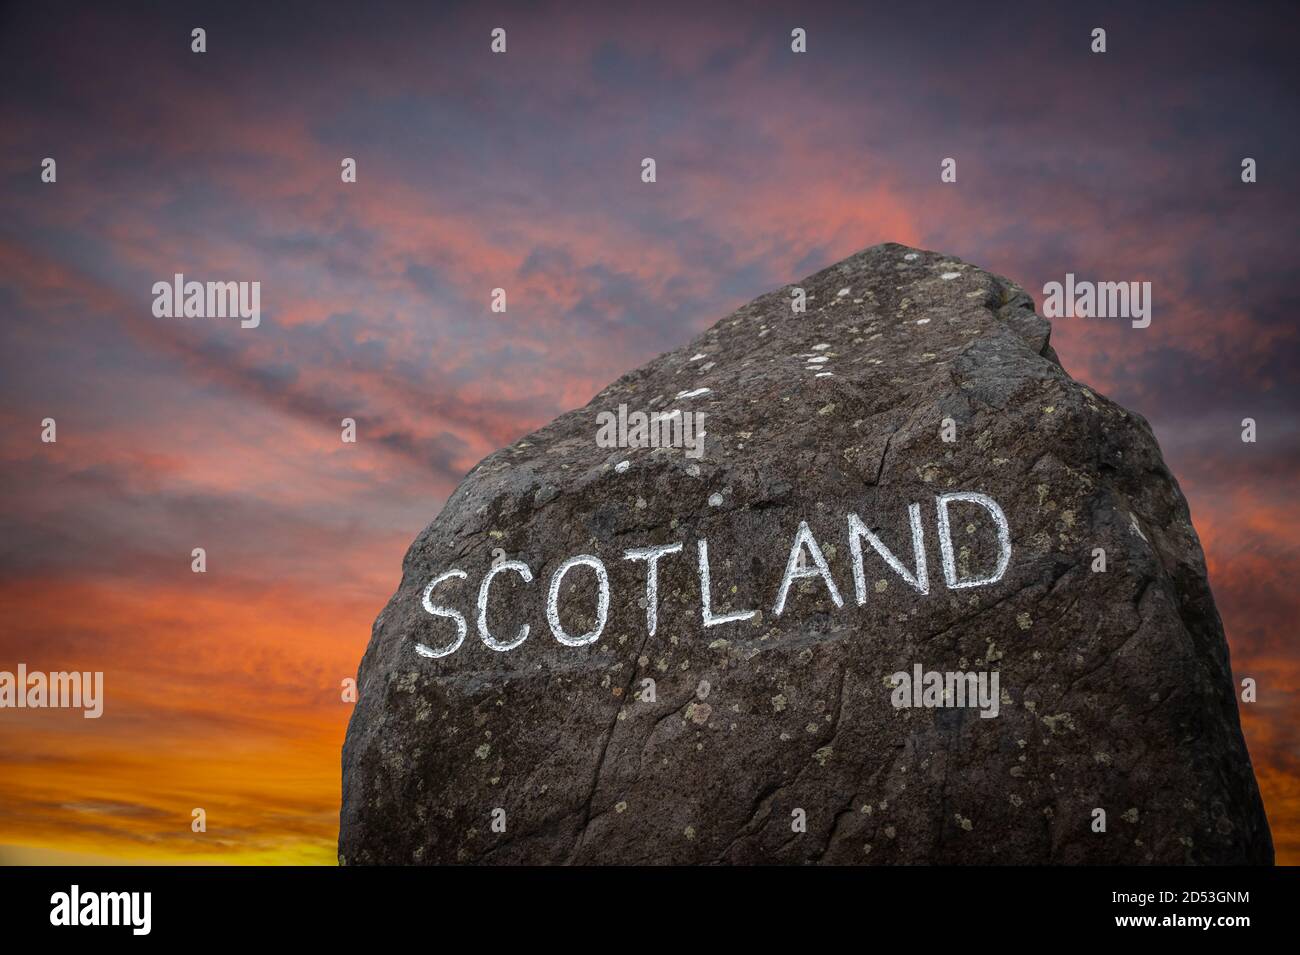 A Stone Marking The Border Between England And Scotland During A Beautiful Sunset Stock Photo